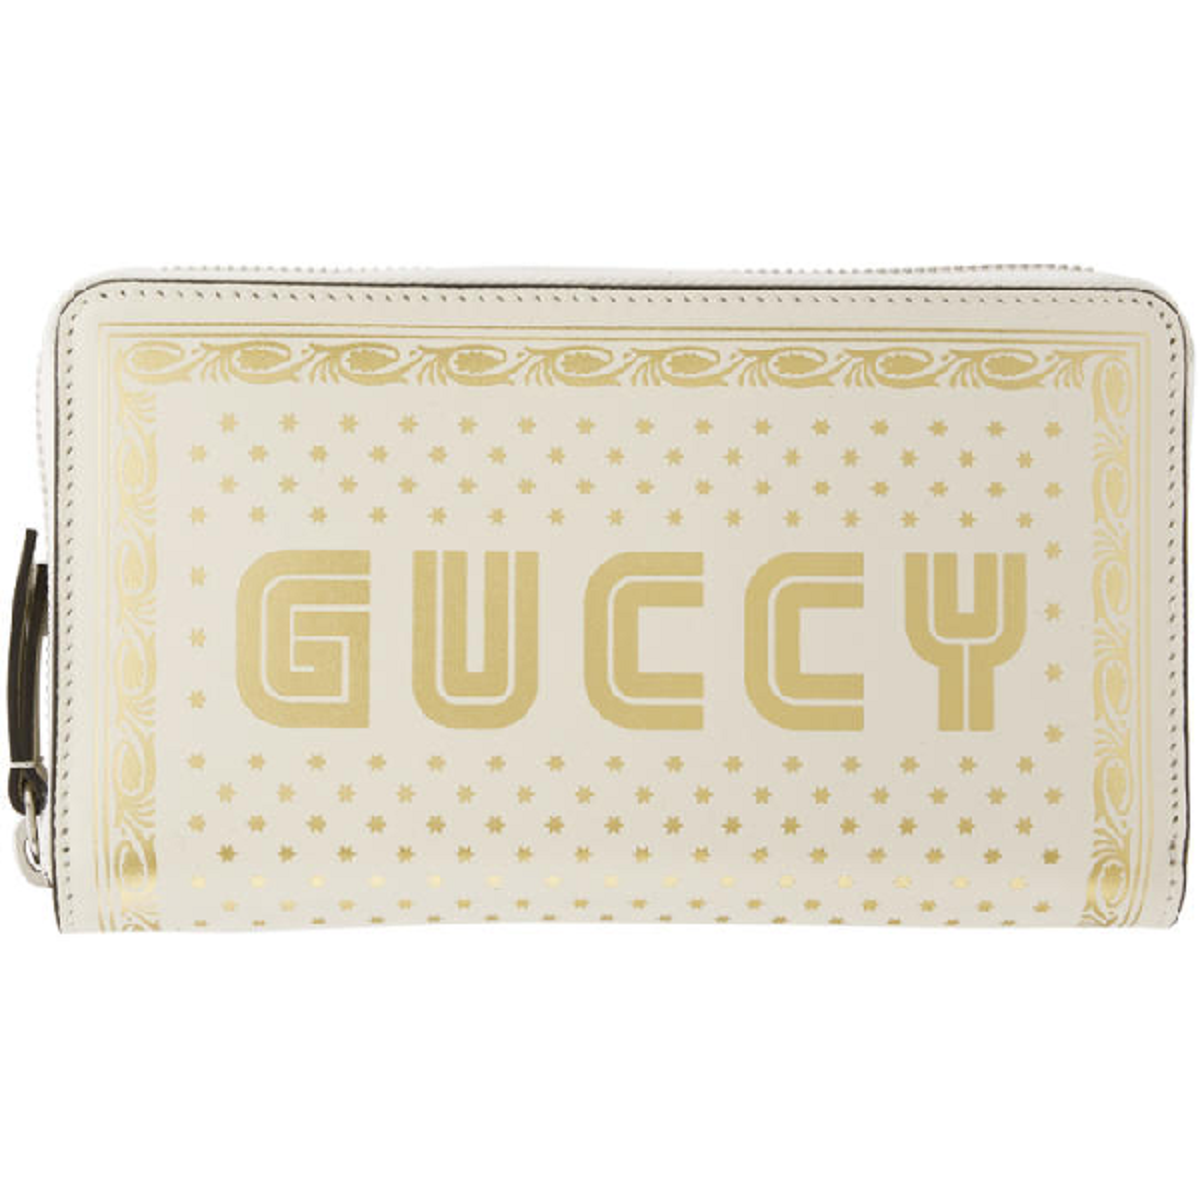 Gucci Sega Guccy Stars White Moon Gold Zipper Leather Wallet 510488 at_Queen_Bee_of_Beverly_Hills